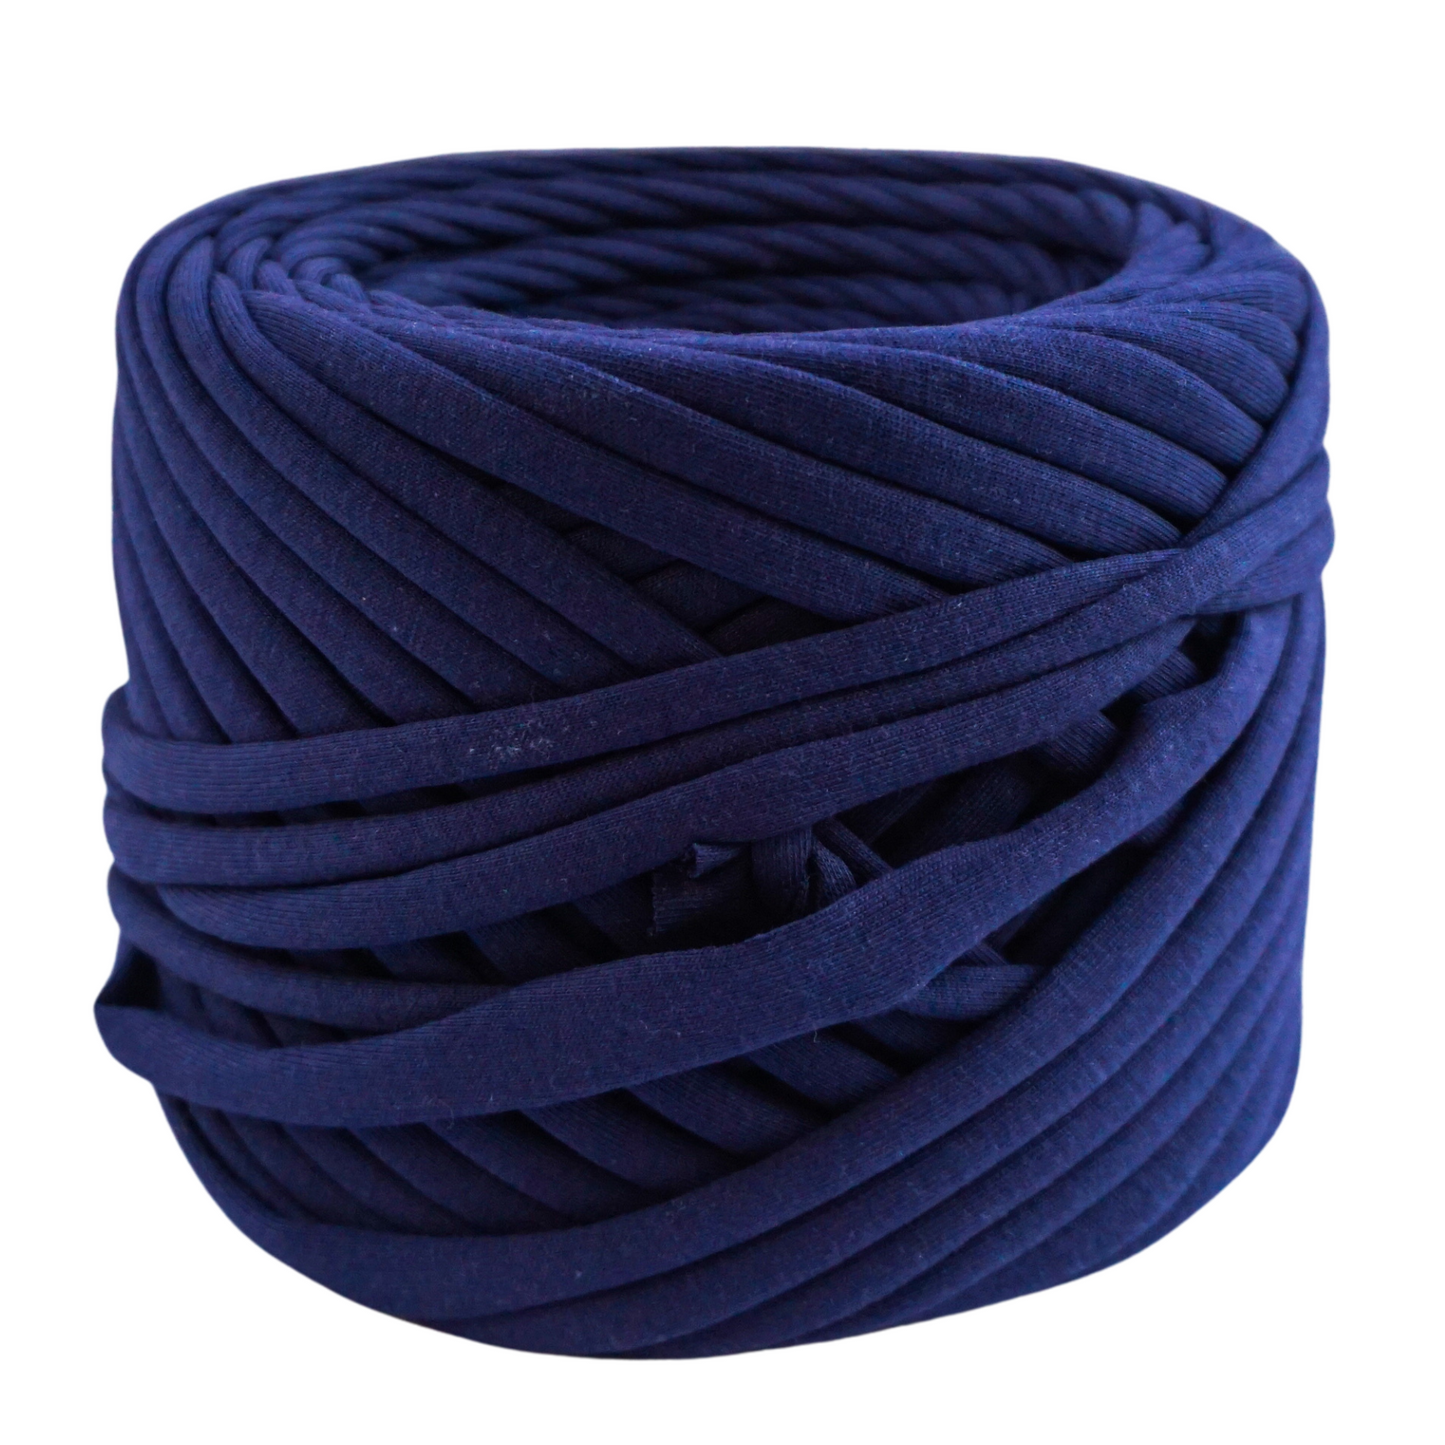 T-shirt yarn for crocheting baskets, bags, rugs and home decor.  Dark blue